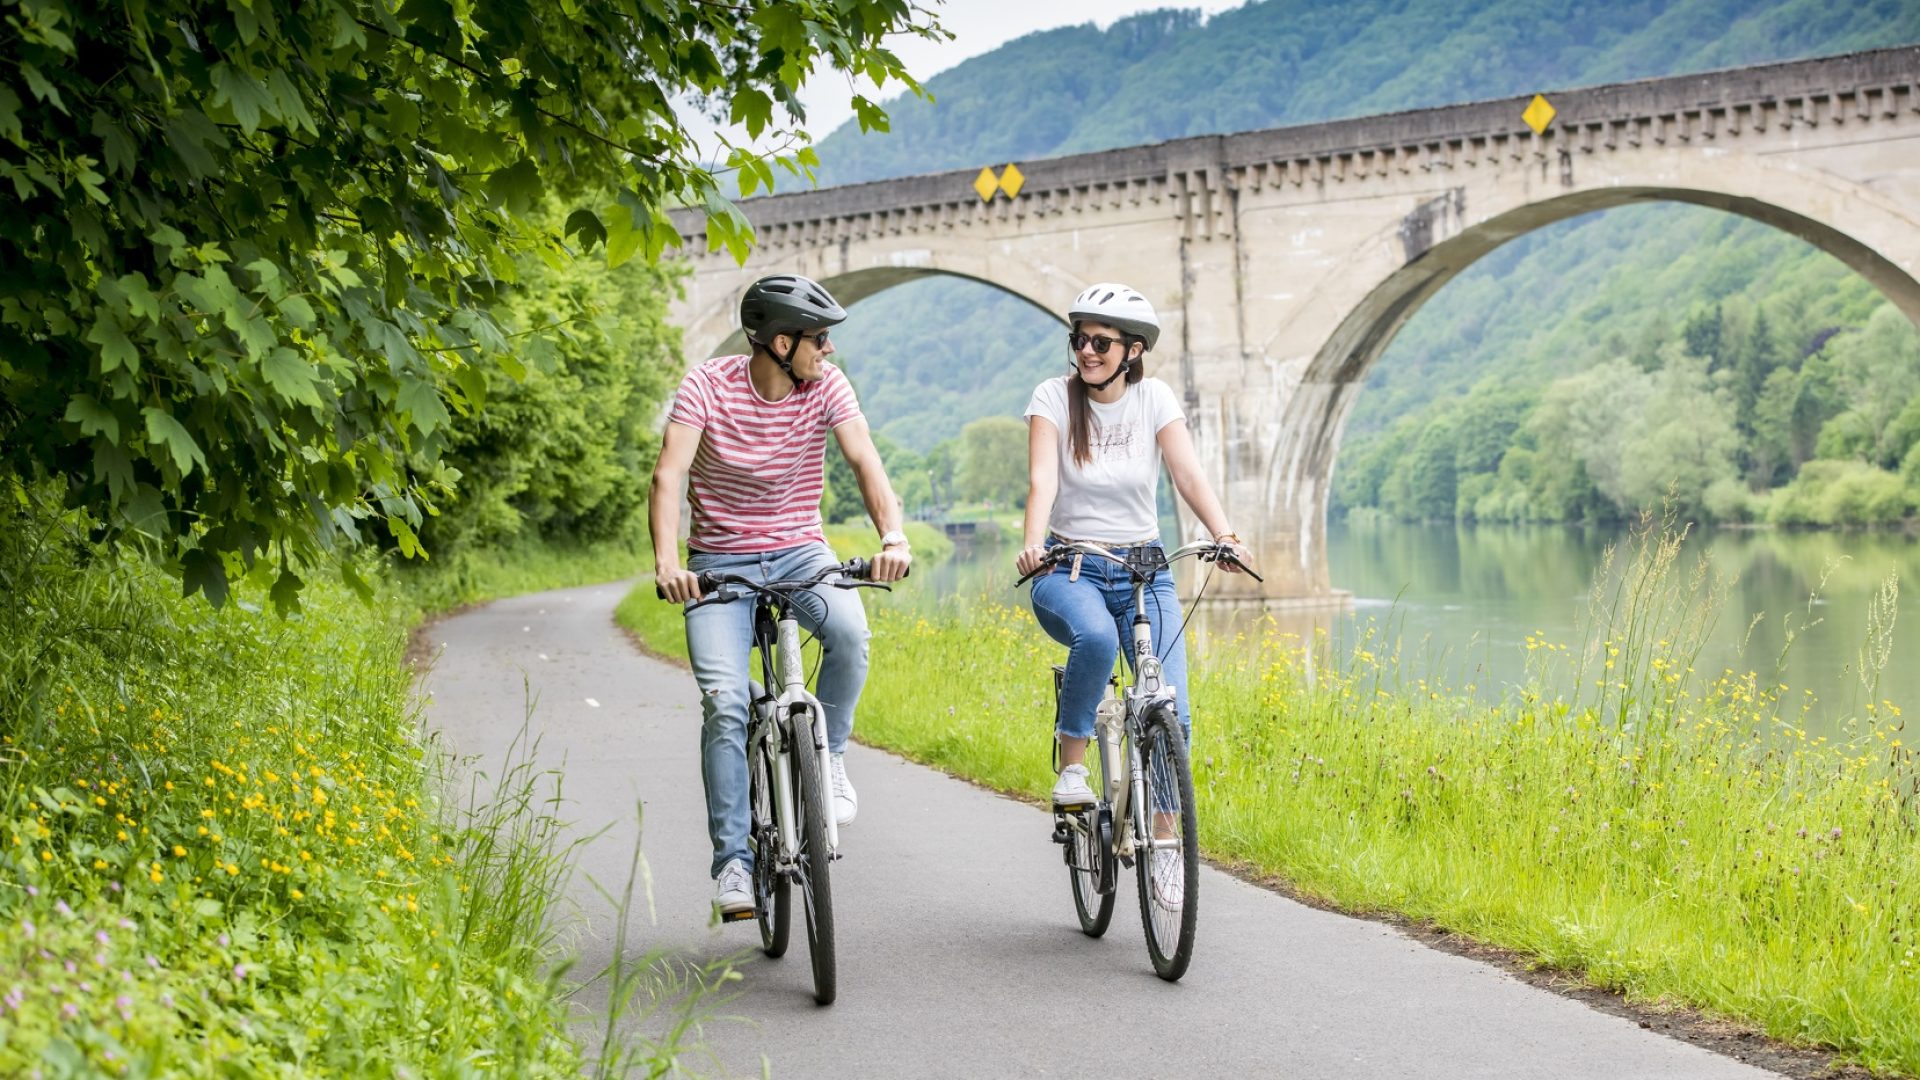 Cycling along the Trans-Ardennes Greenway